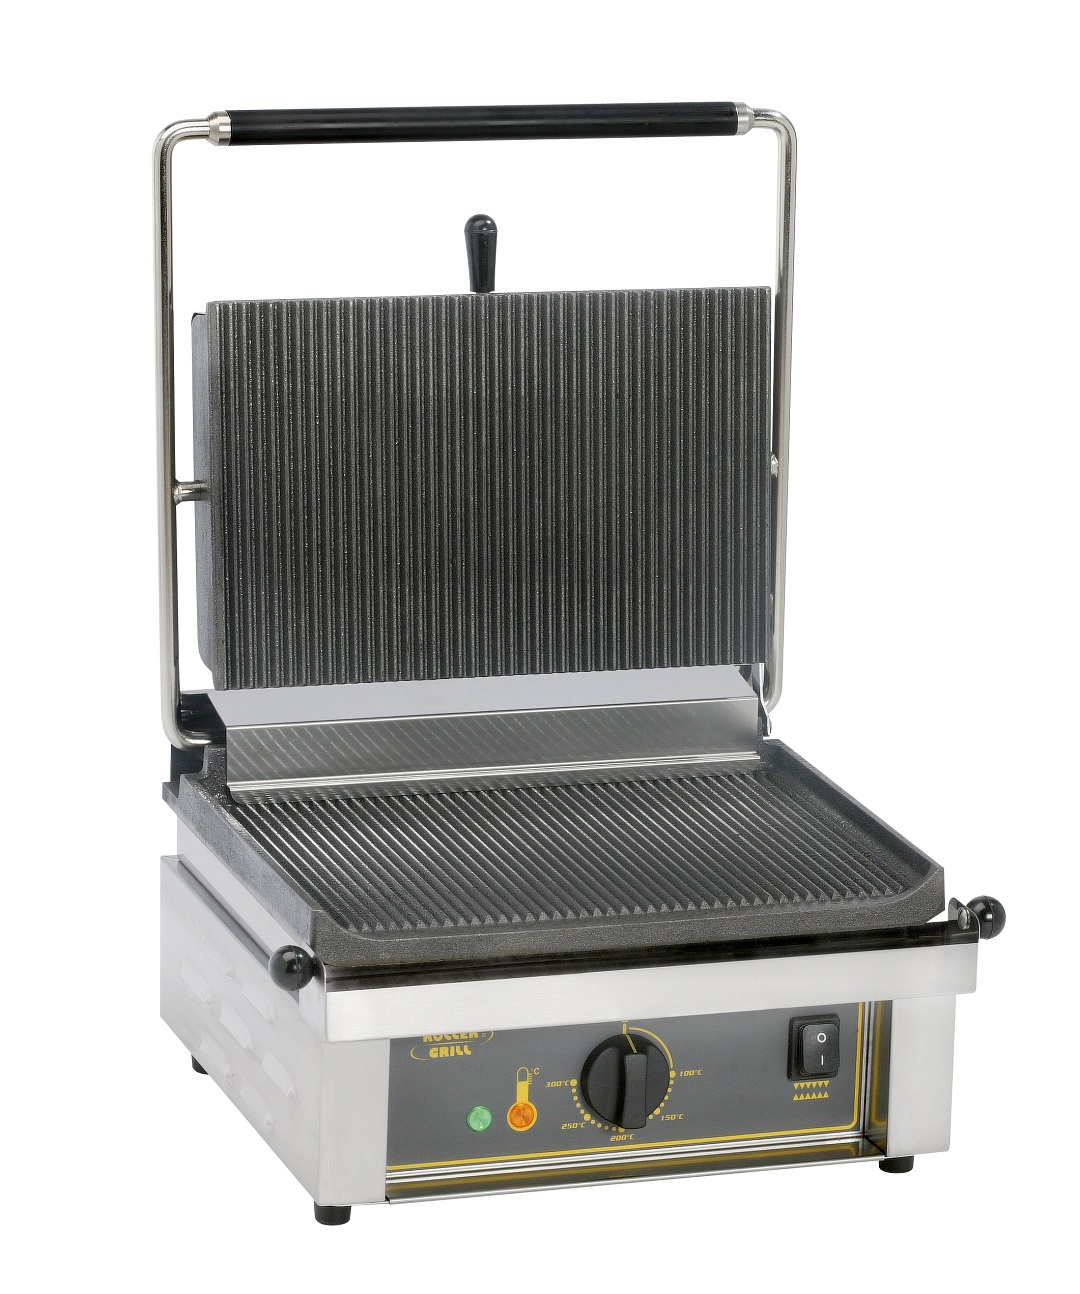 Roller Grill Panini Large Contact Grill